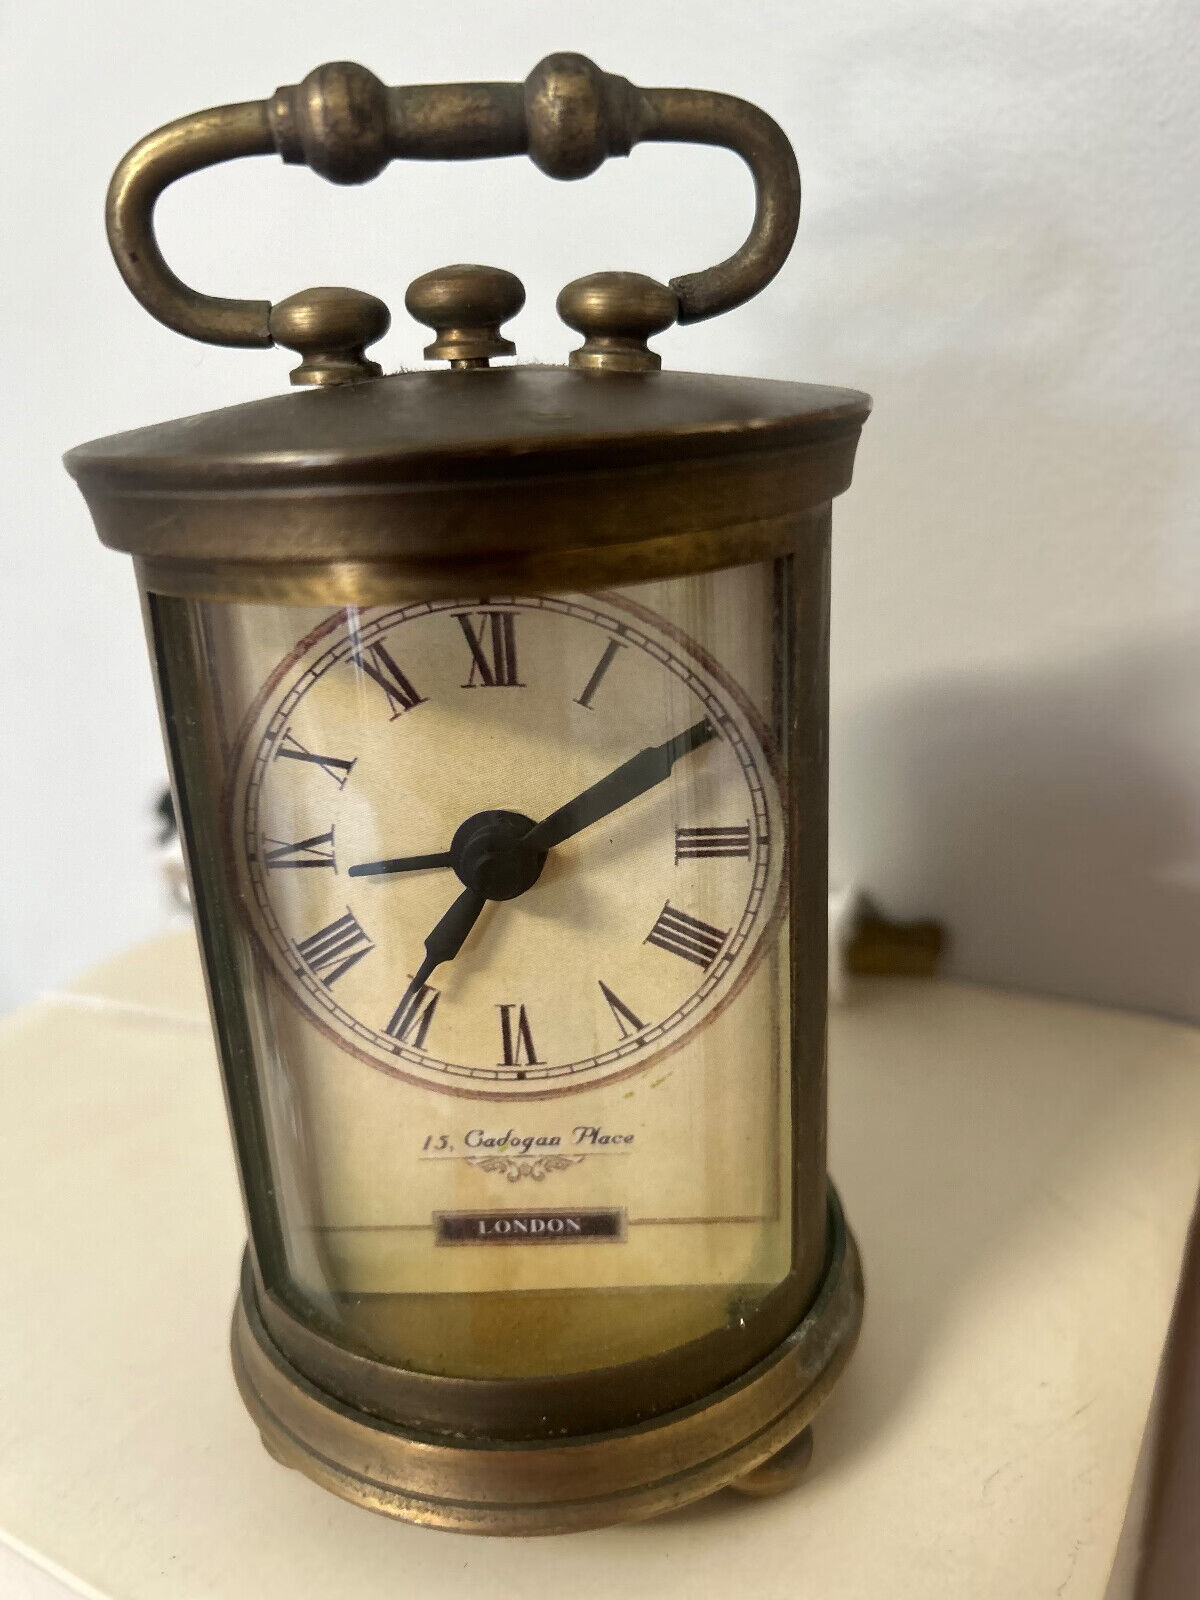 15 Cadogan Place London Clock Bronze Case Battery Operated vintage